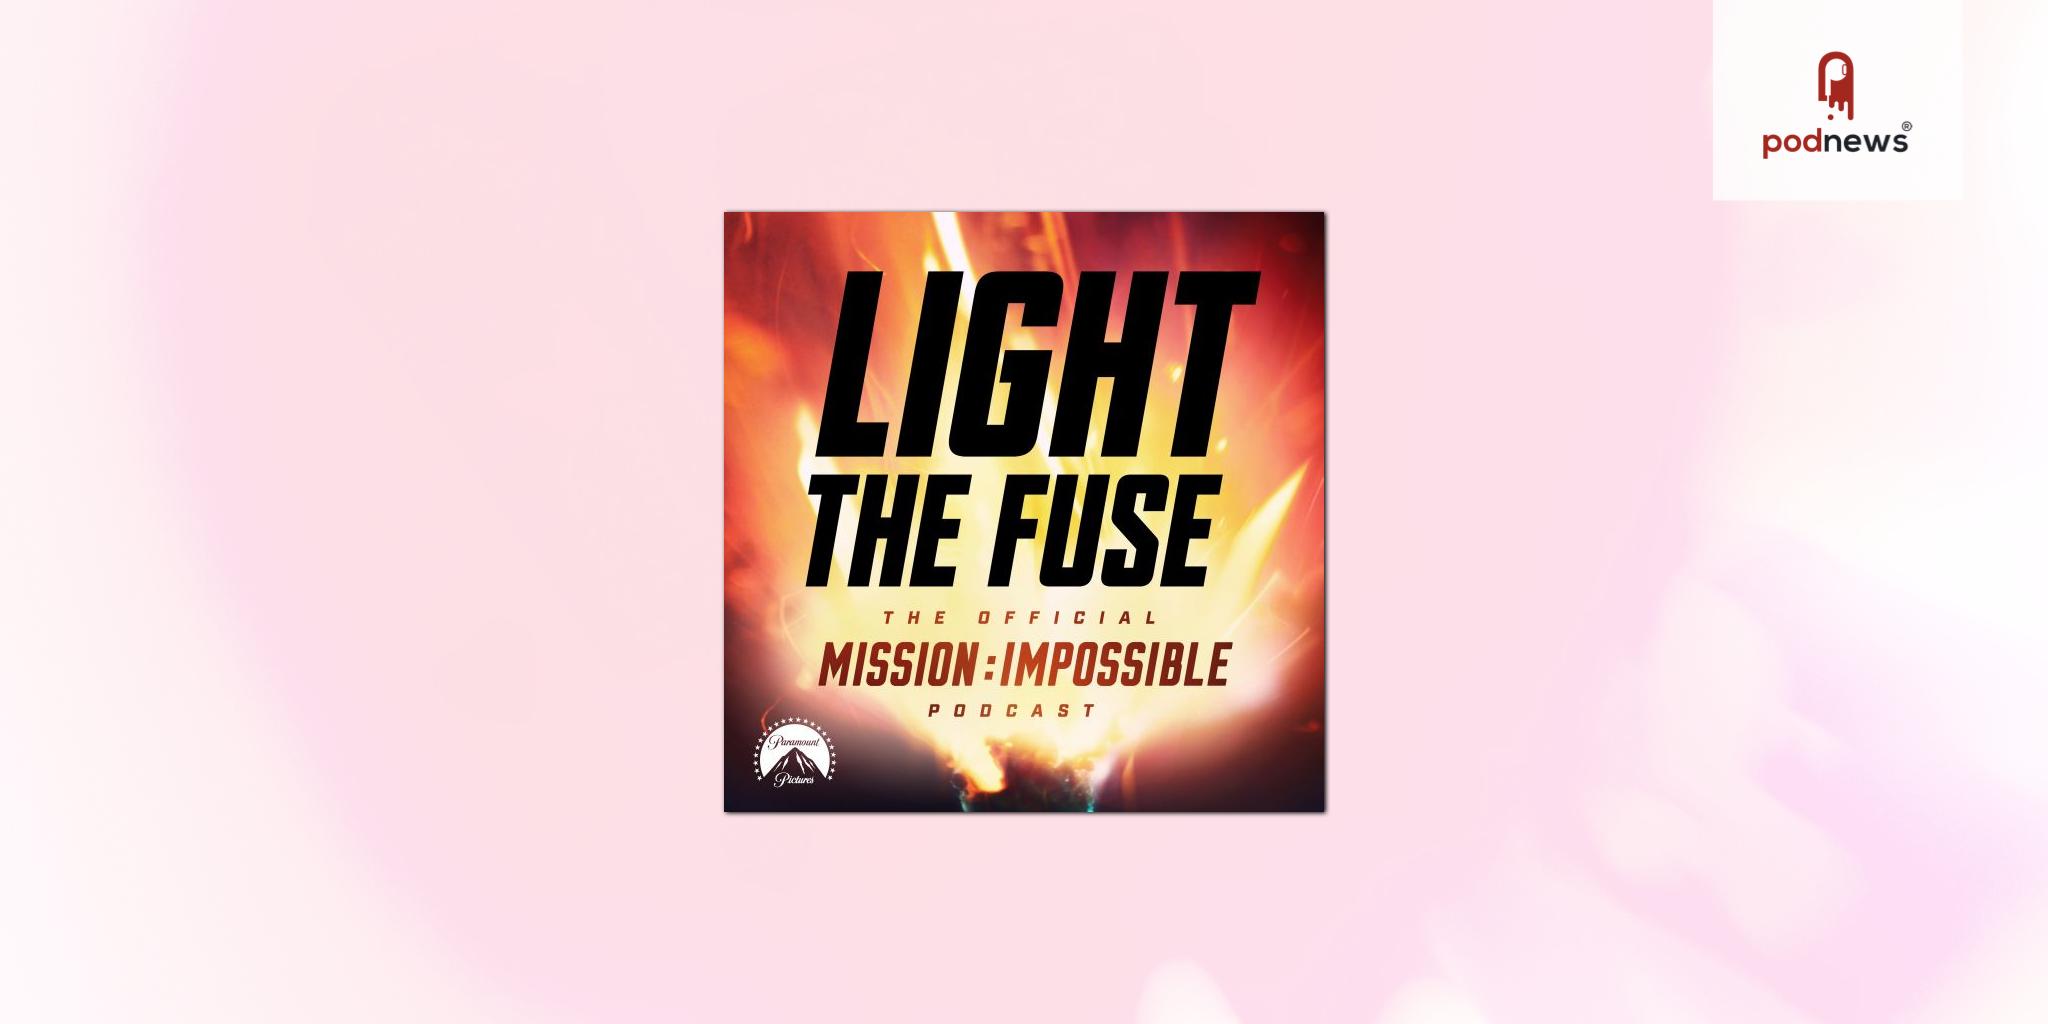 Mission: Impossible Podcast “Light the Fuse” Joins Paramount Audio Family